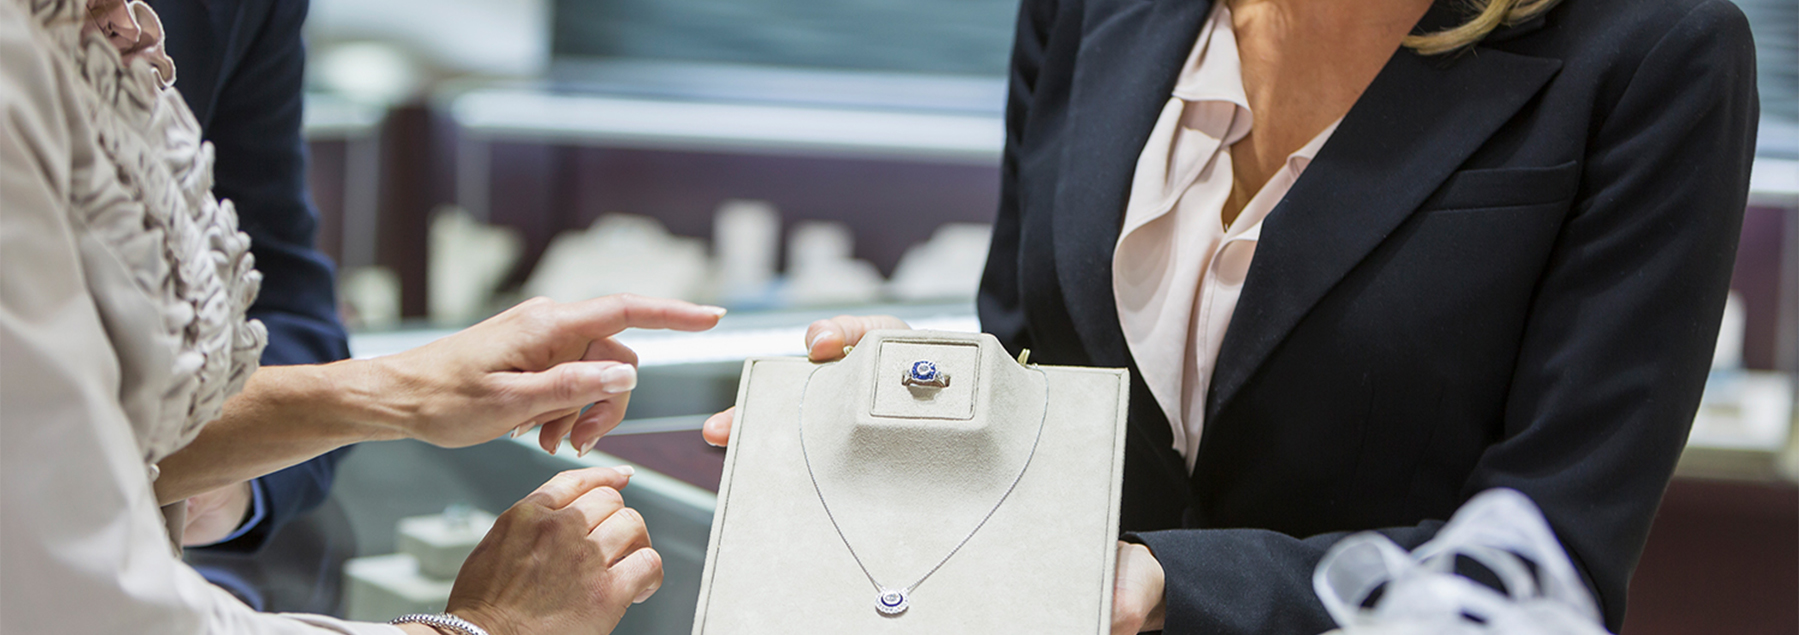 AS YOUR PARTNERS, WE ARE HERE TO HELP YOUR JEWELRY STORE GROW.  Drive Retail Johns Creek, GA